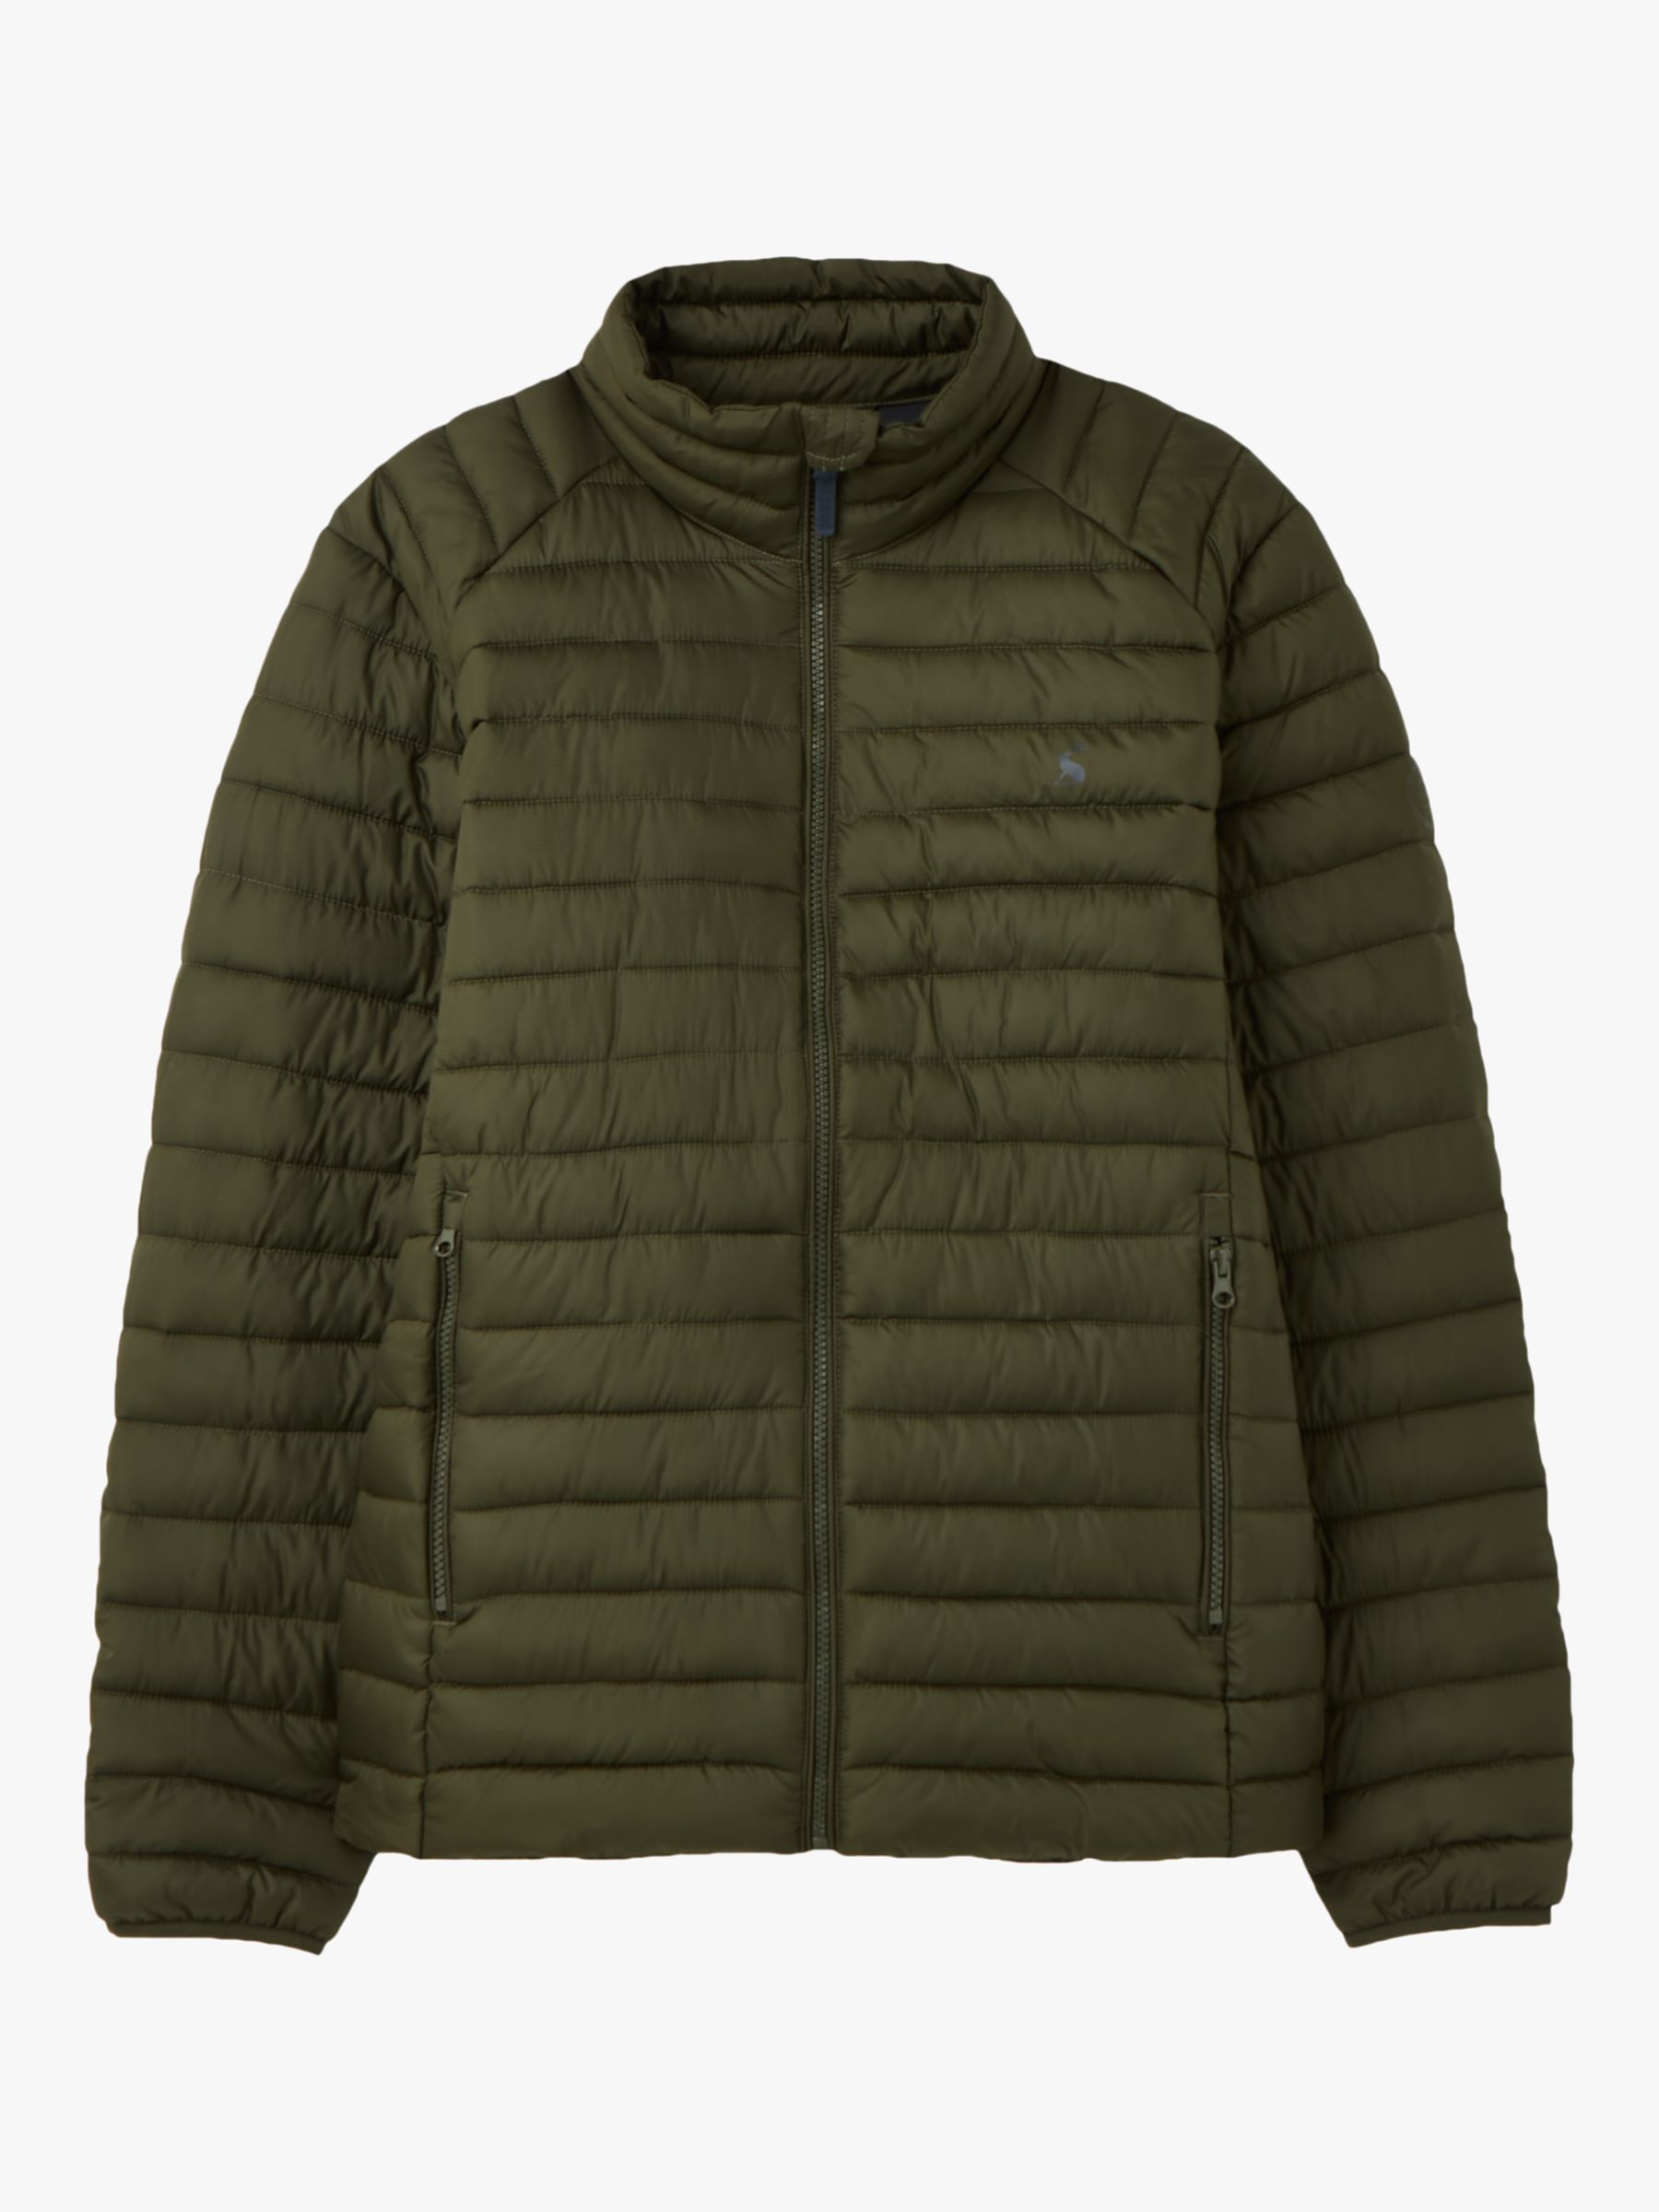 Joules Hooded Go To Quilted Jacket, Olive at John Lewis & Partners